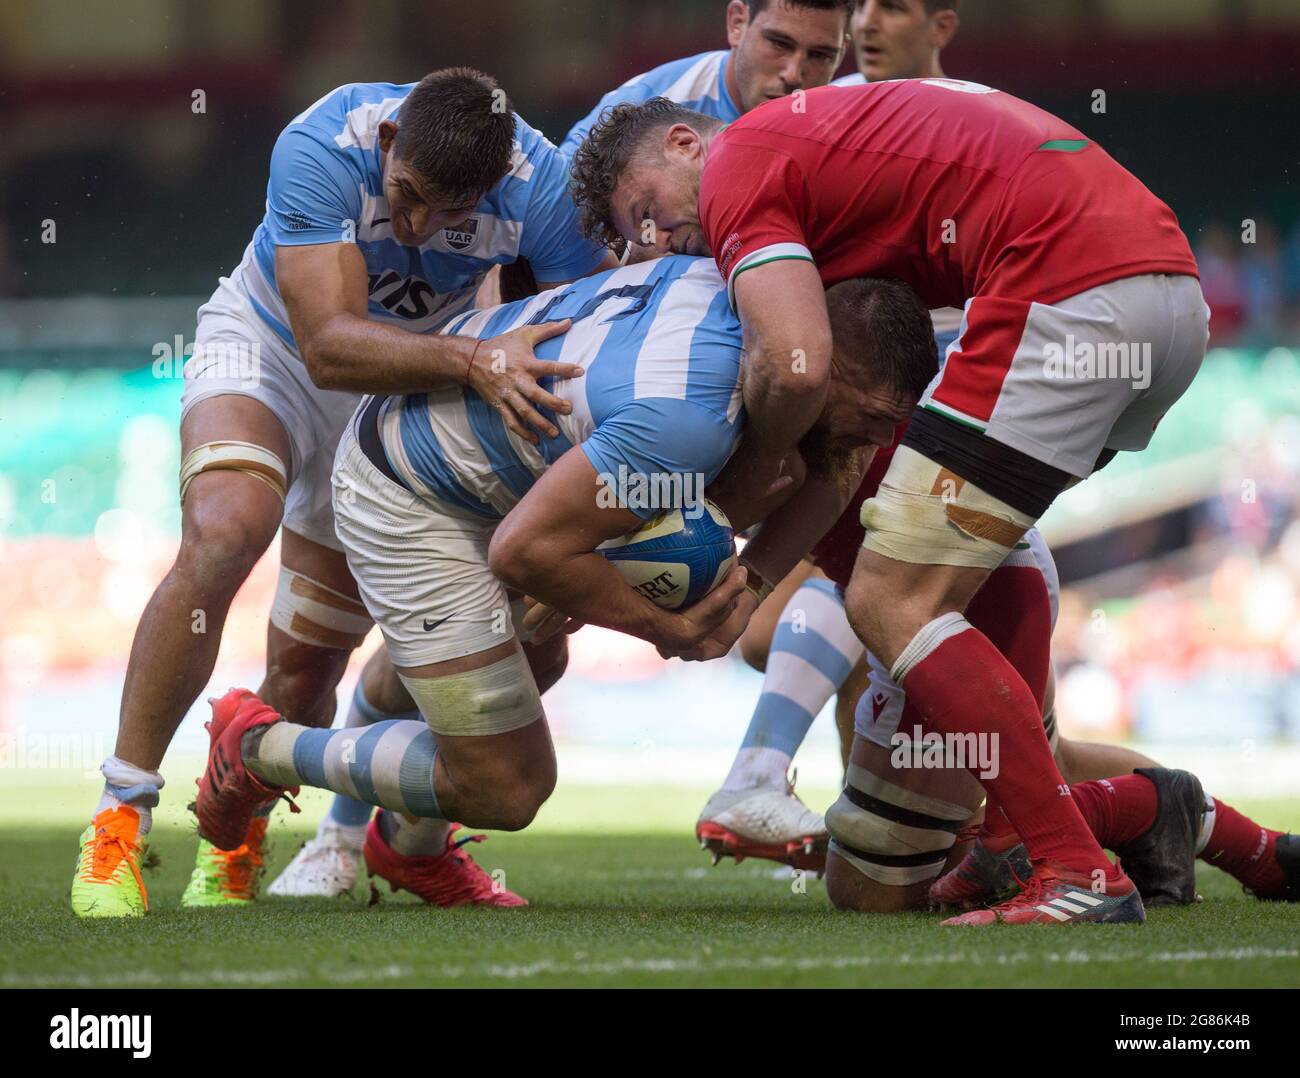 Cardiff, UK. 17th July, 2021. Cardiff, UK. July 17th : Marcos Kremer (Argentina) controls the ball during the 2021 Summer Internationals match between Wales and Argentina at Principality Stadium. Credit: Federico Guerra Morán/Alamy Live News Stock Photo